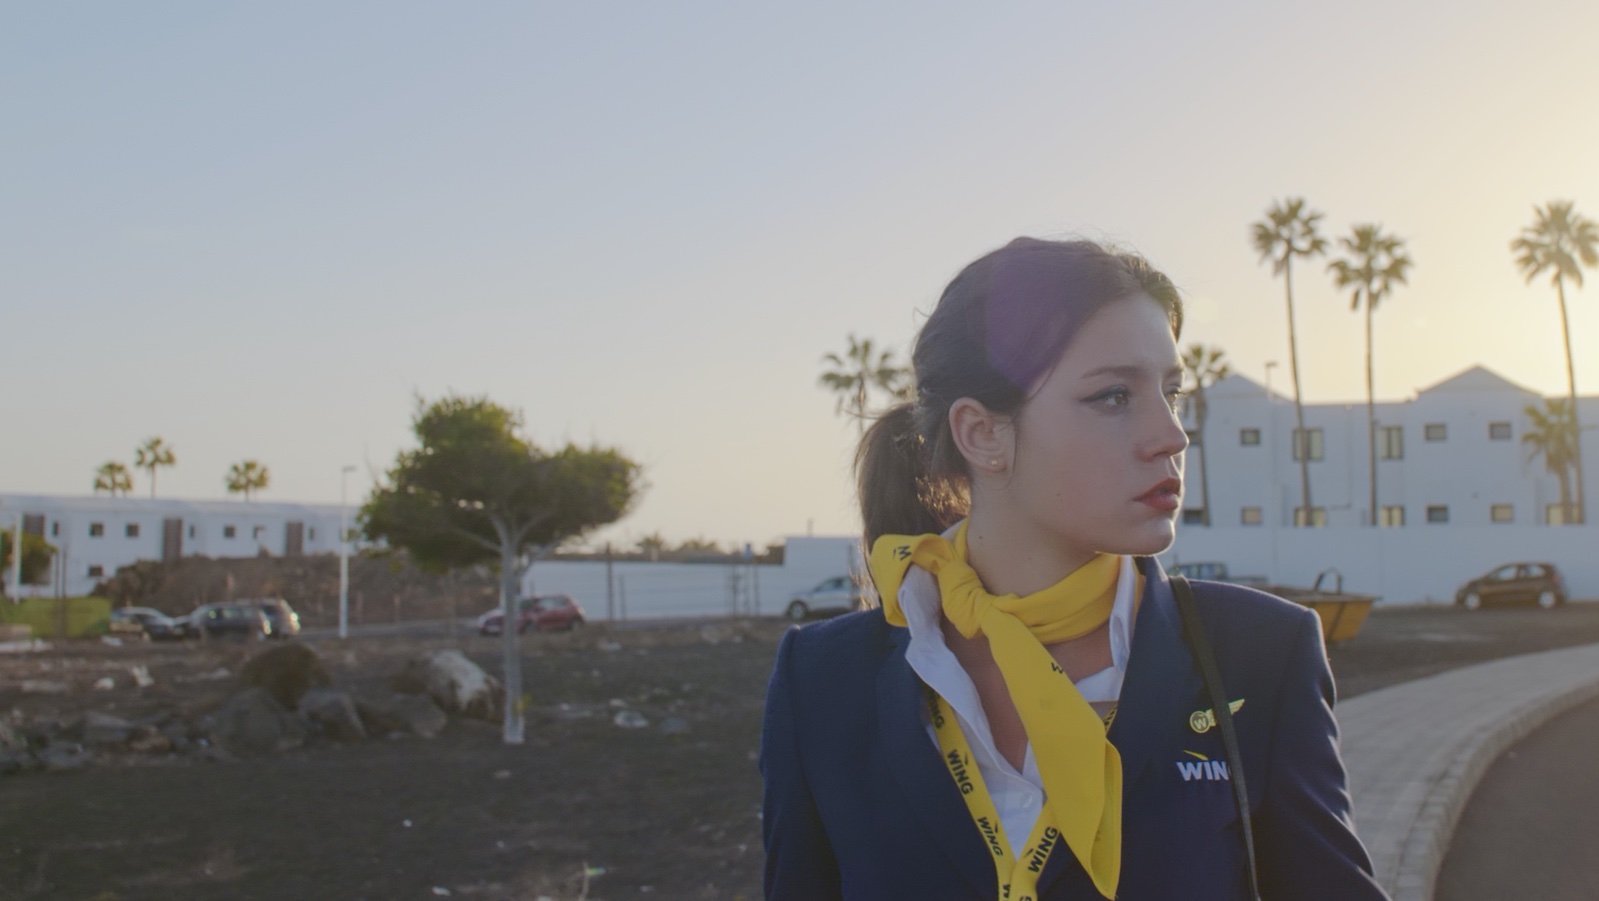 A flight attendant wearing a yellow scarf looks off-camera to the left with a distressed expression, against a sunset.